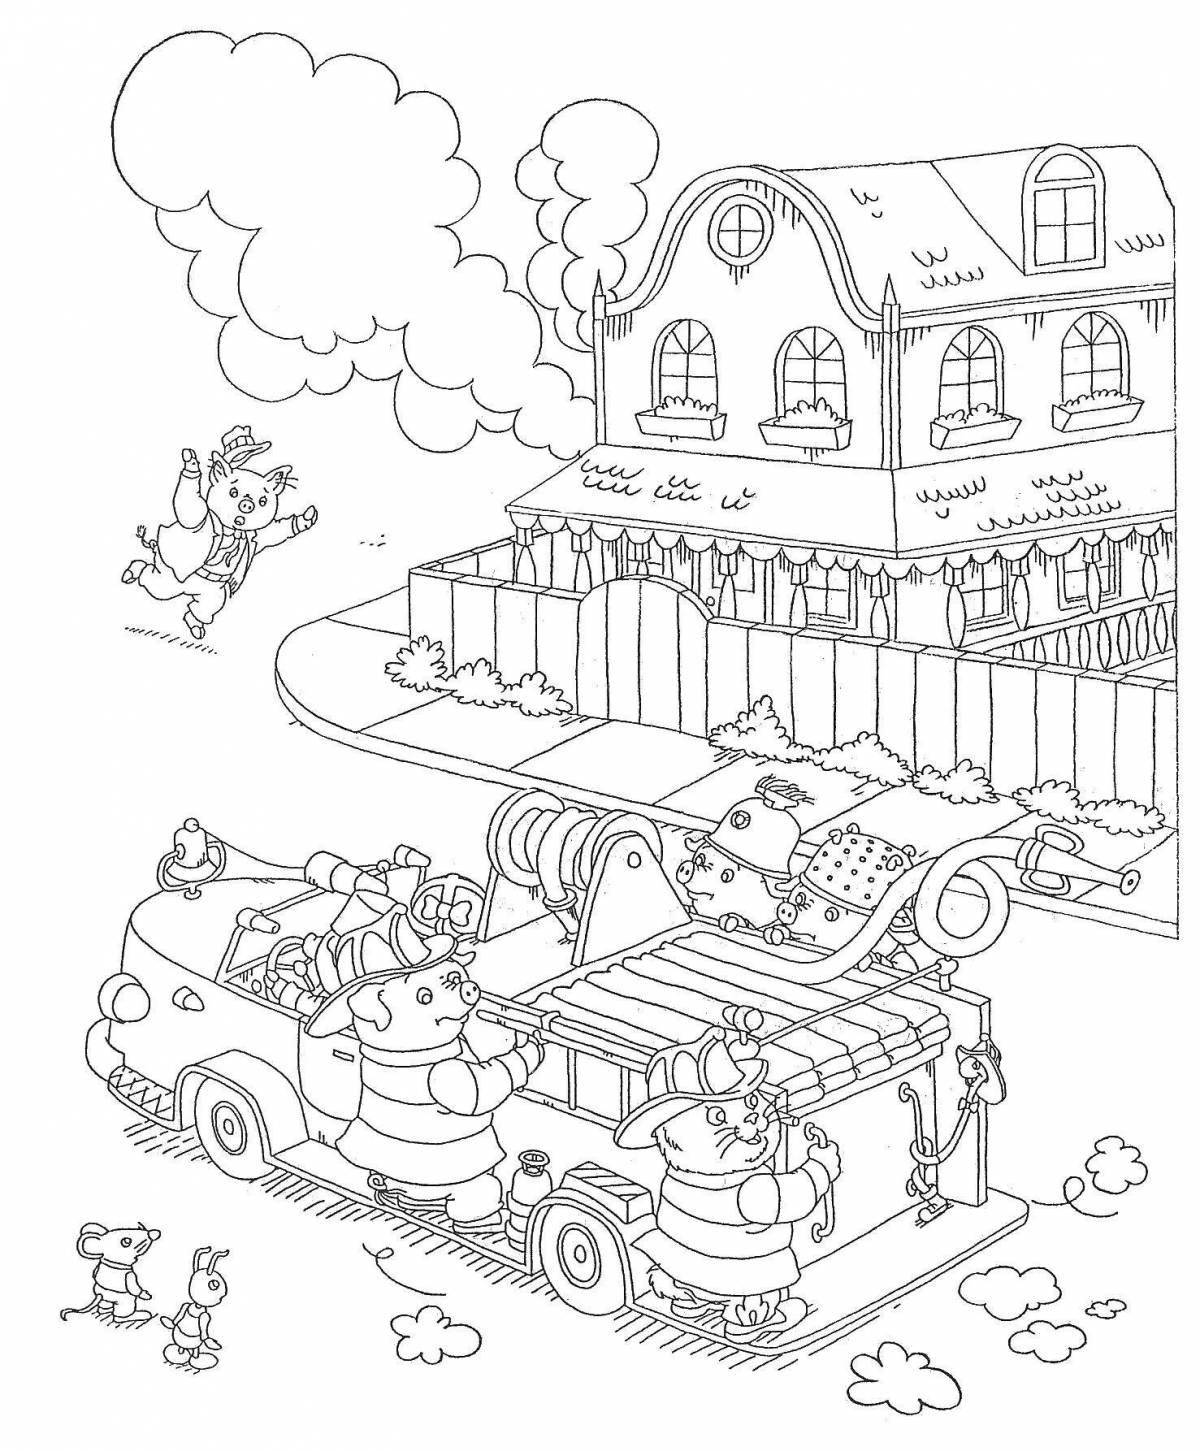 Vibrant fire station coloring page